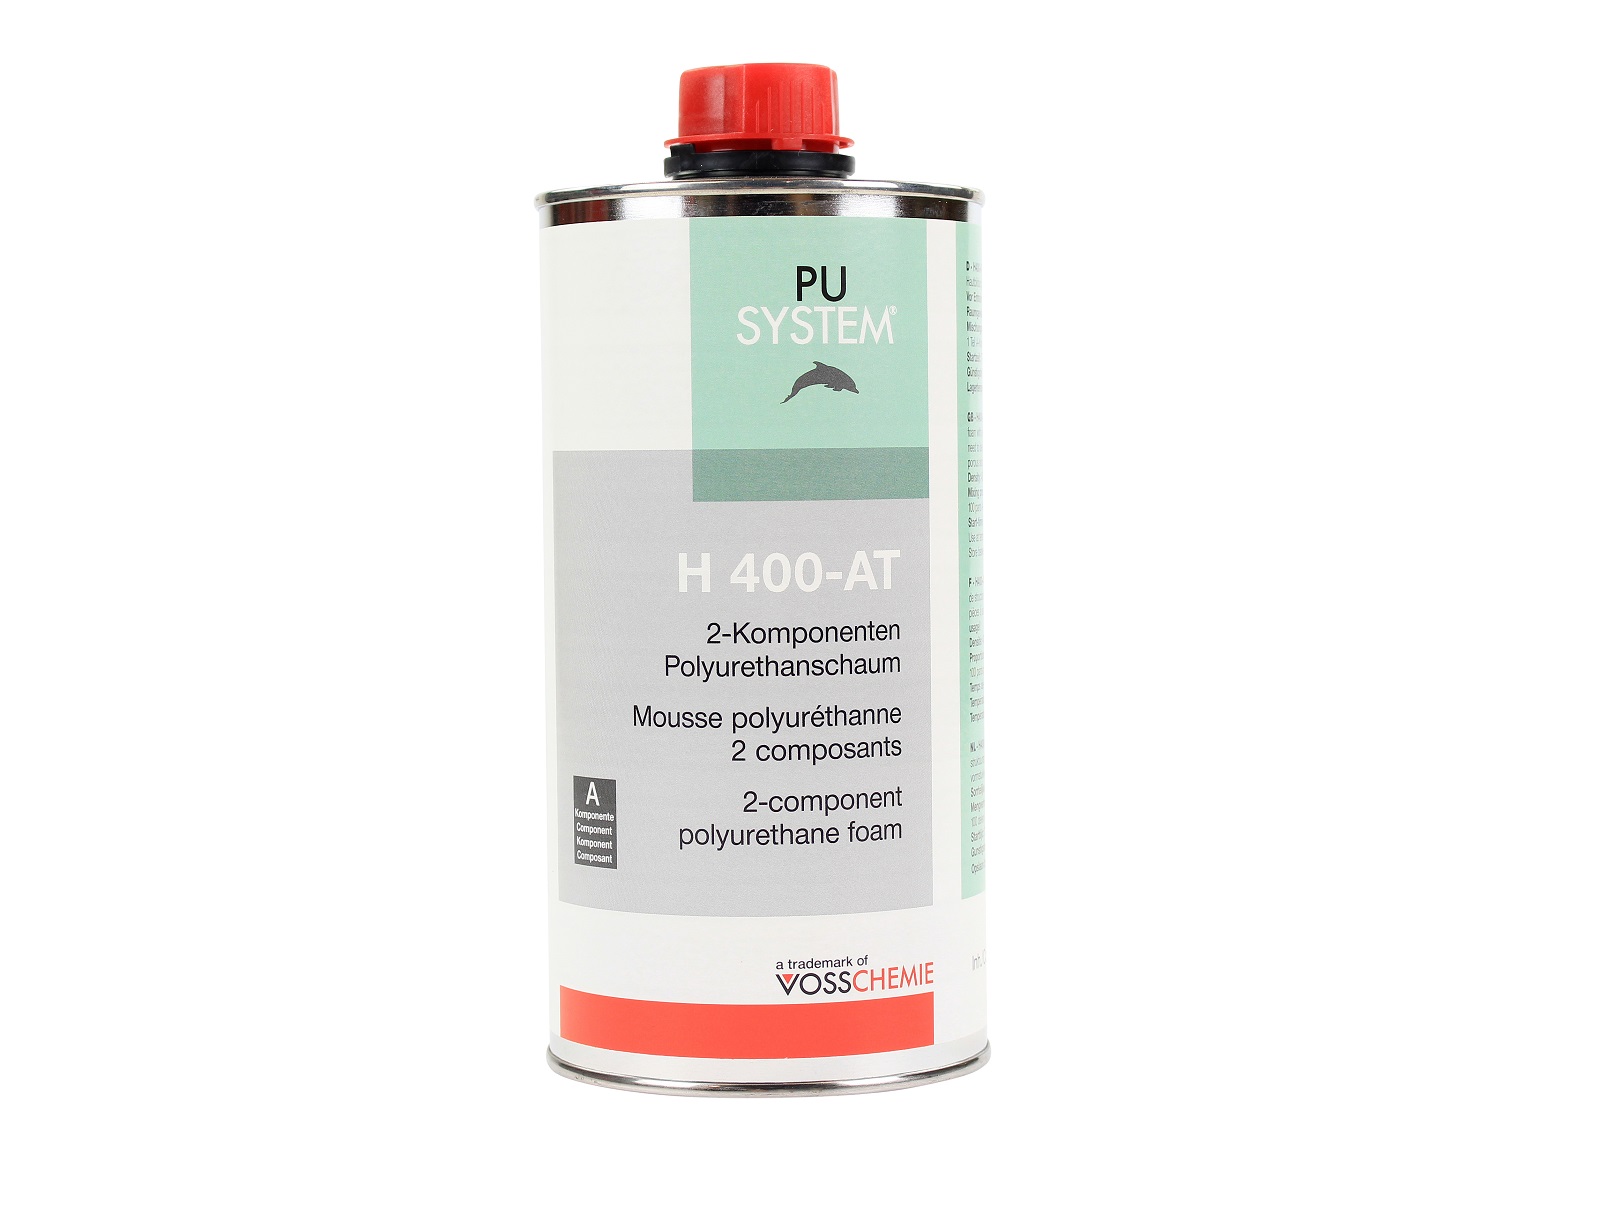 PU foam H400-AT - Insulating or filling hollow spaces - 1 kg